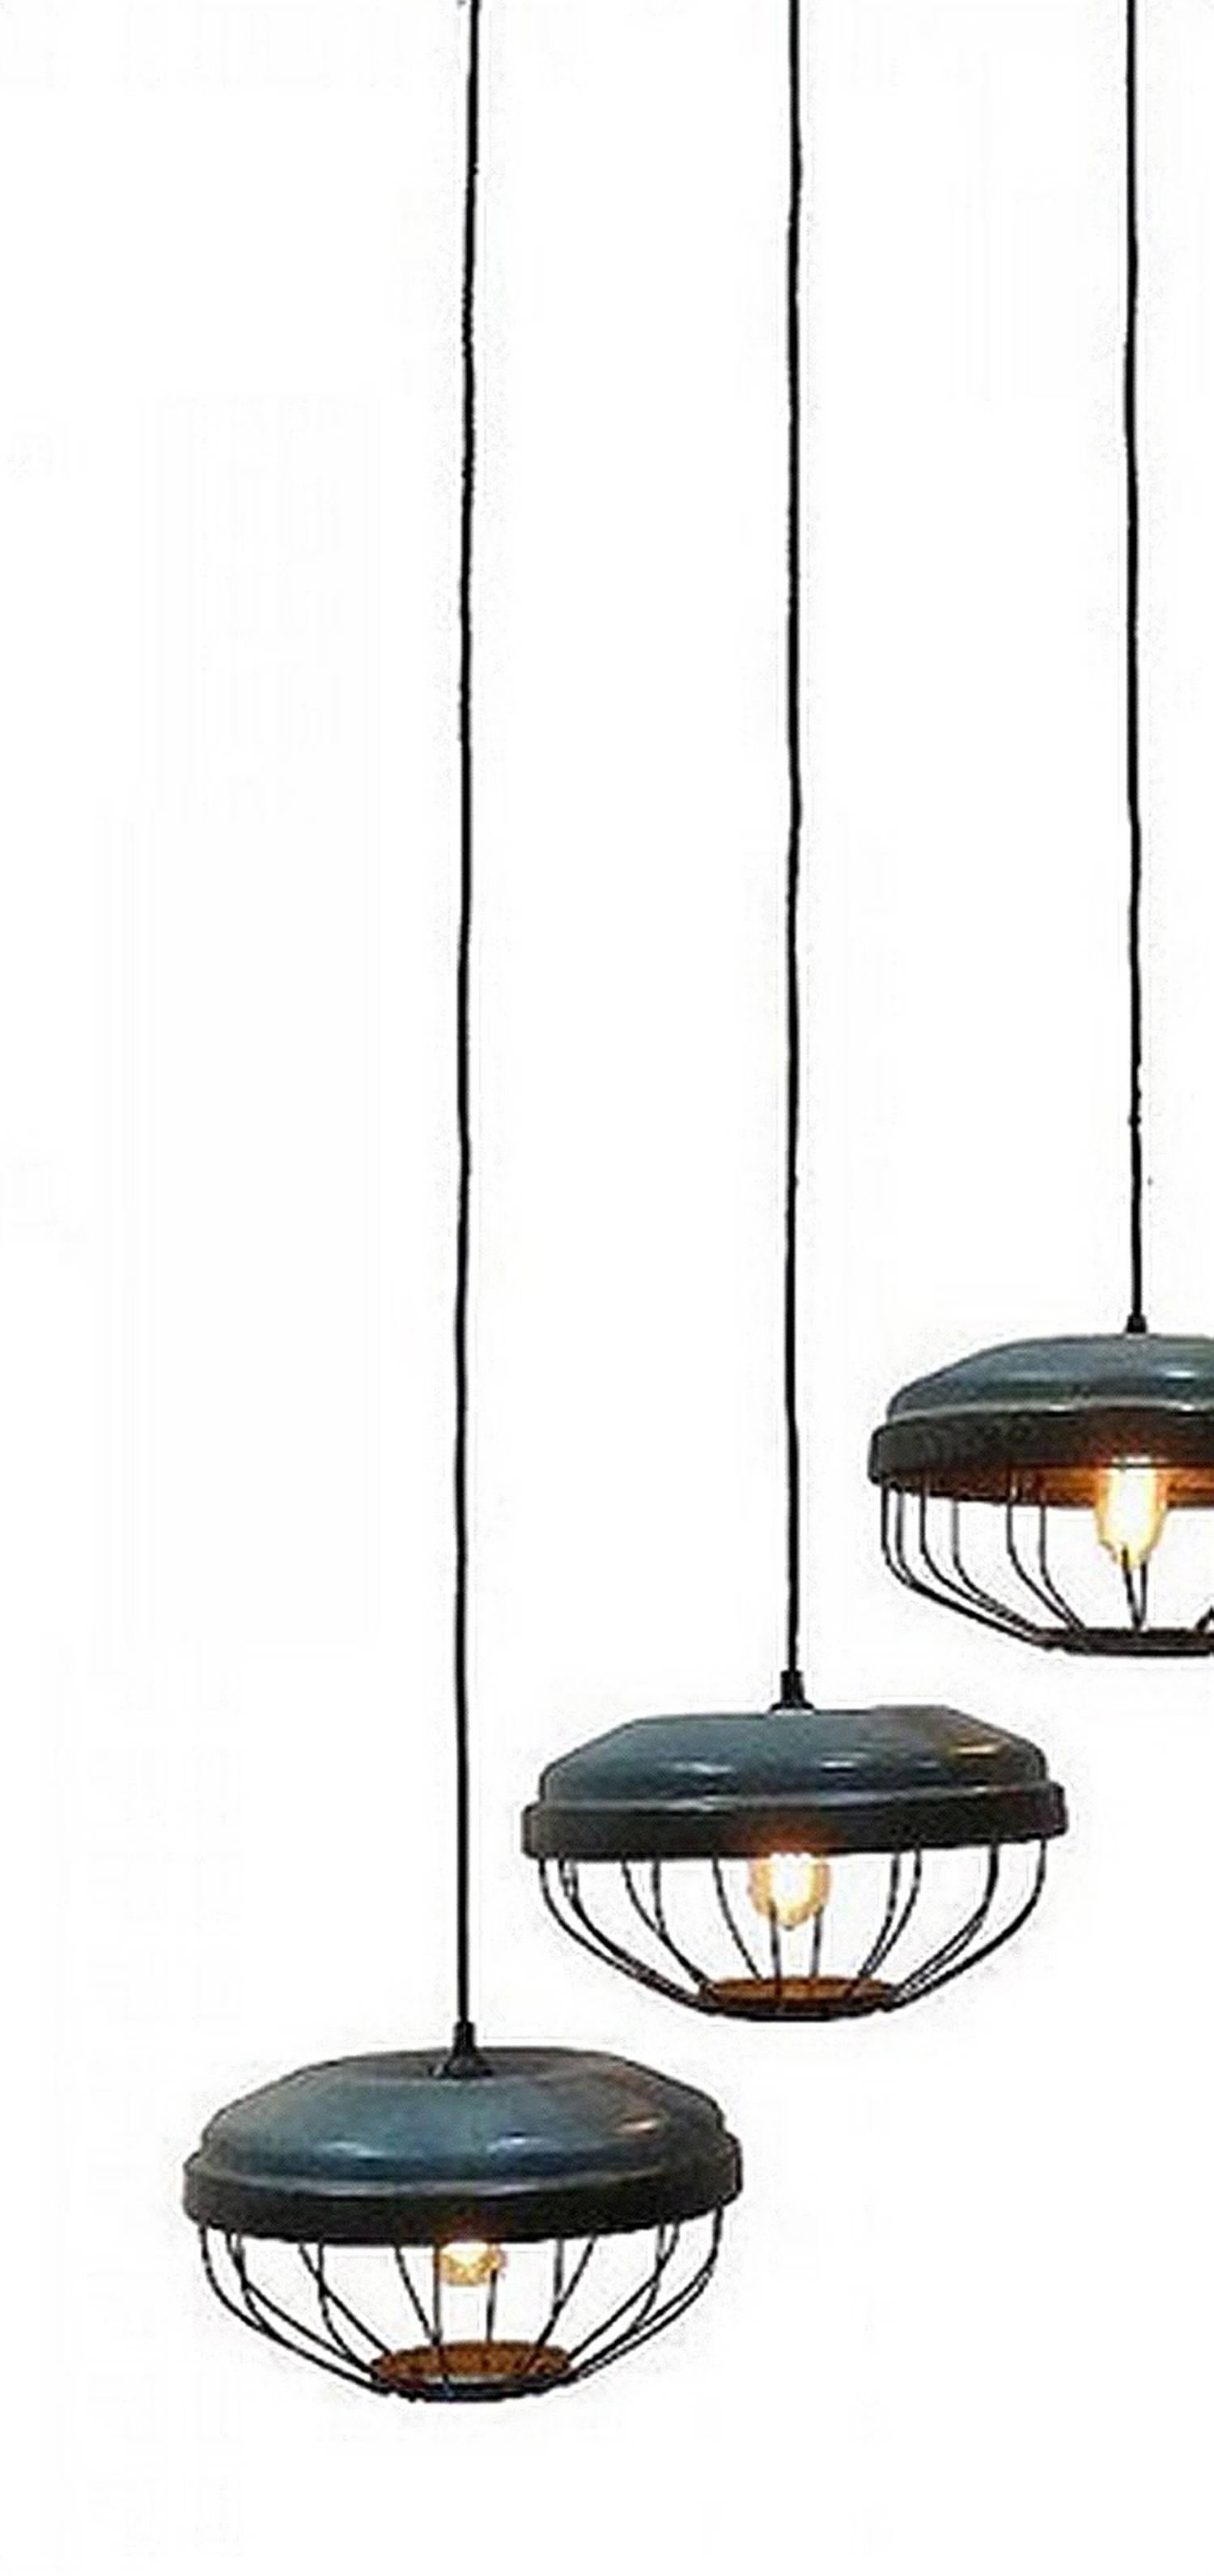 Swinging Metal Enameled Lamps Sold Also Separately 1